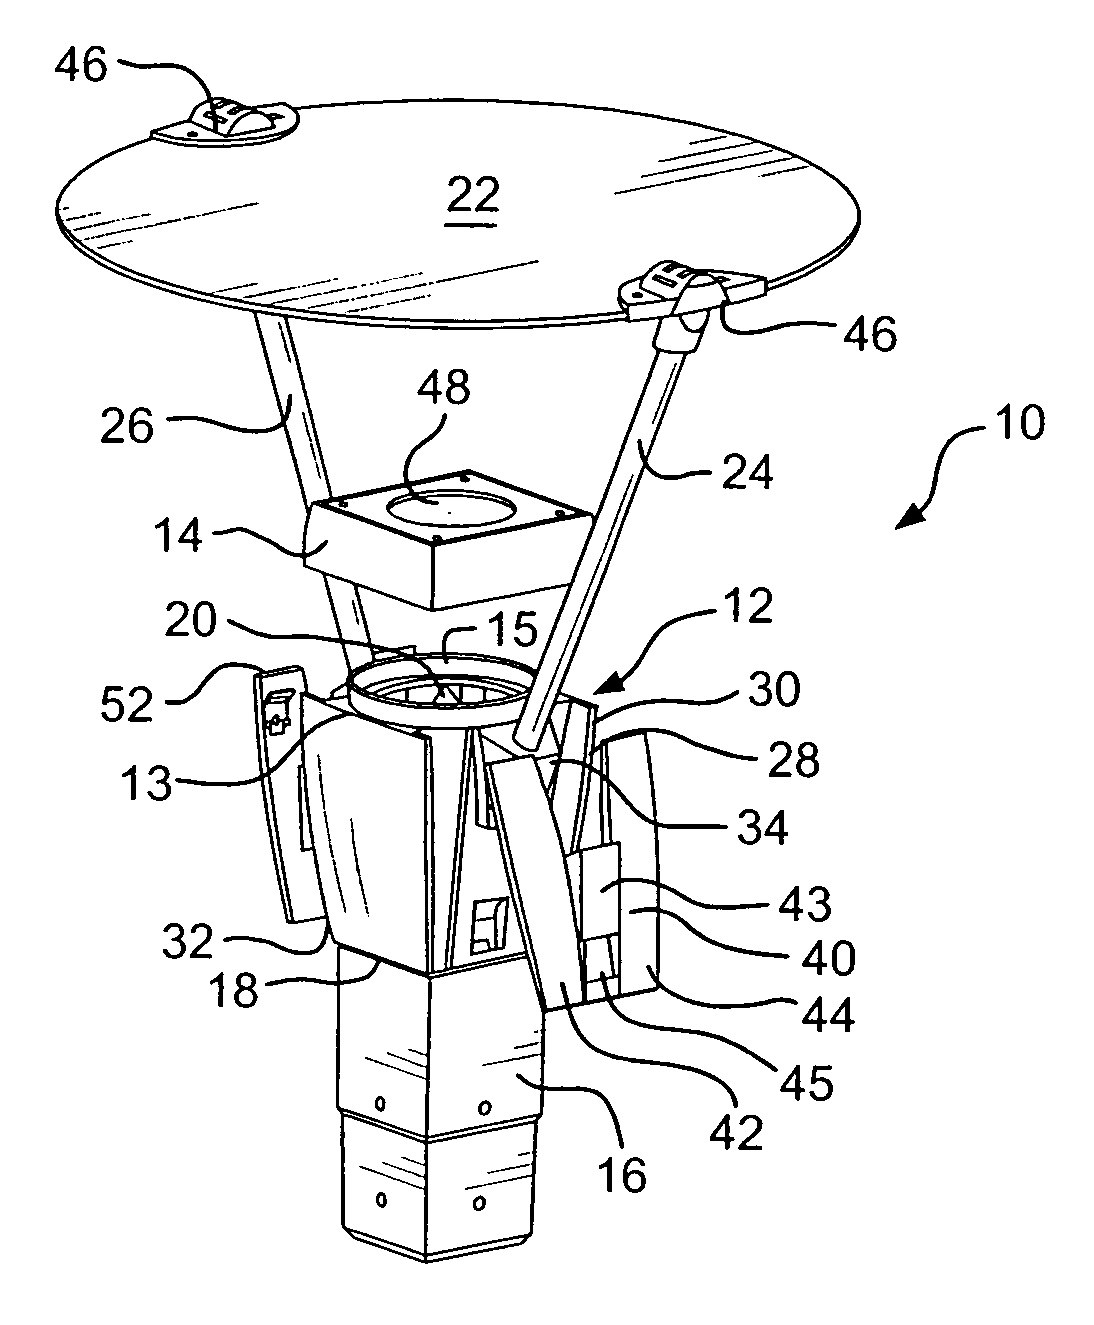 Lighting fixture having a latching system and an auxiliary emergency light